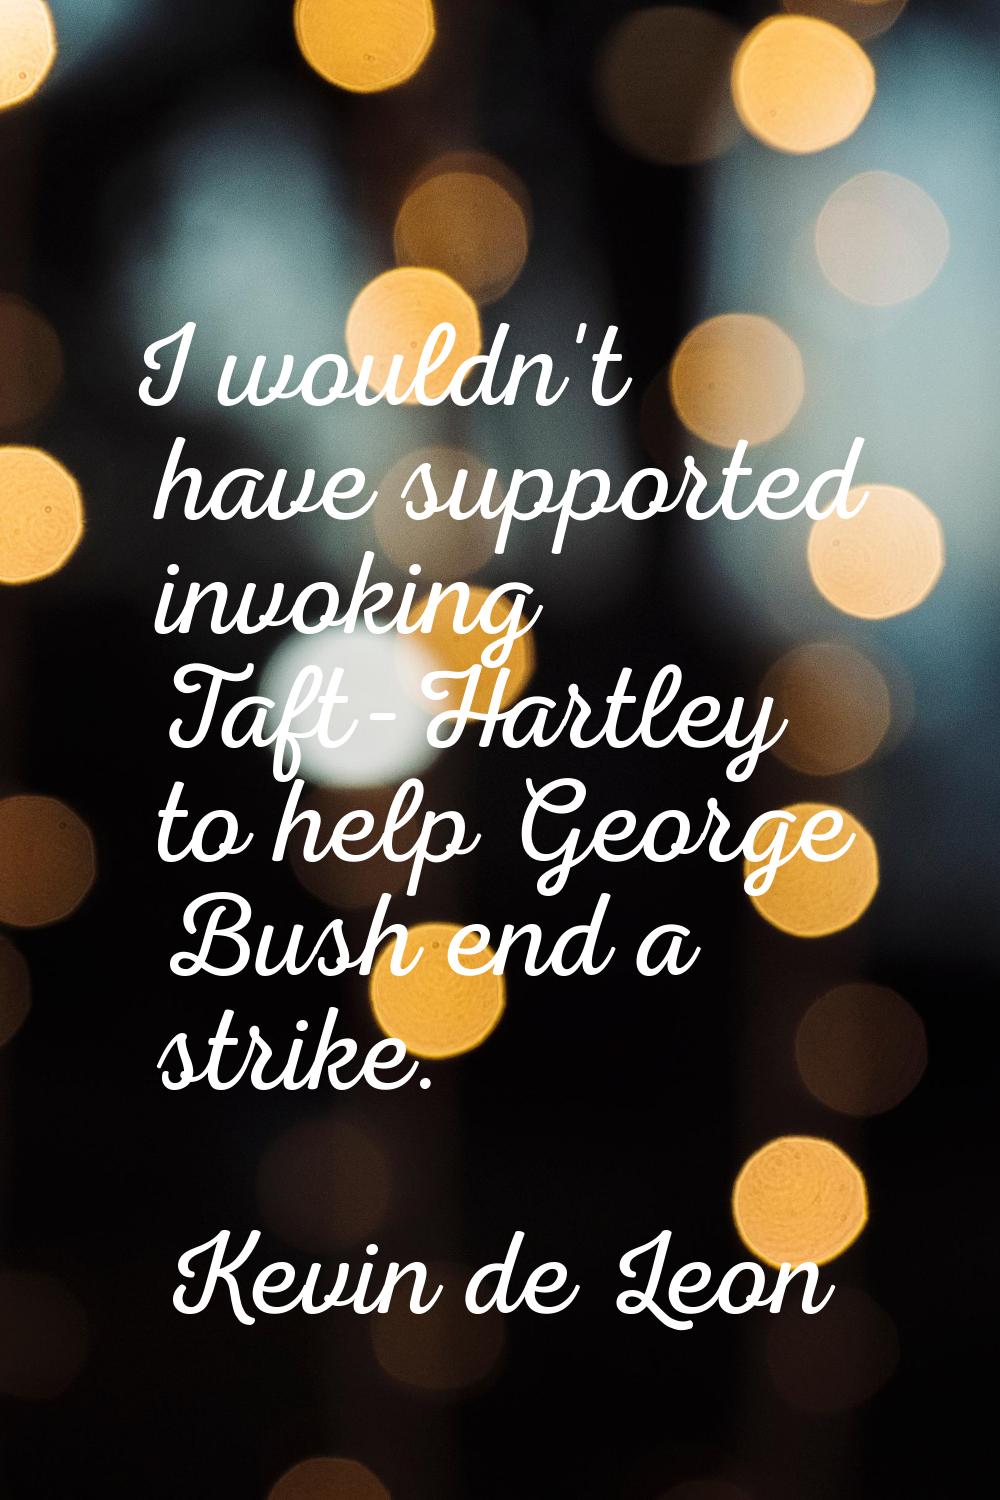 I wouldn't have supported invoking Taft-Hartley to help George Bush end a strike.